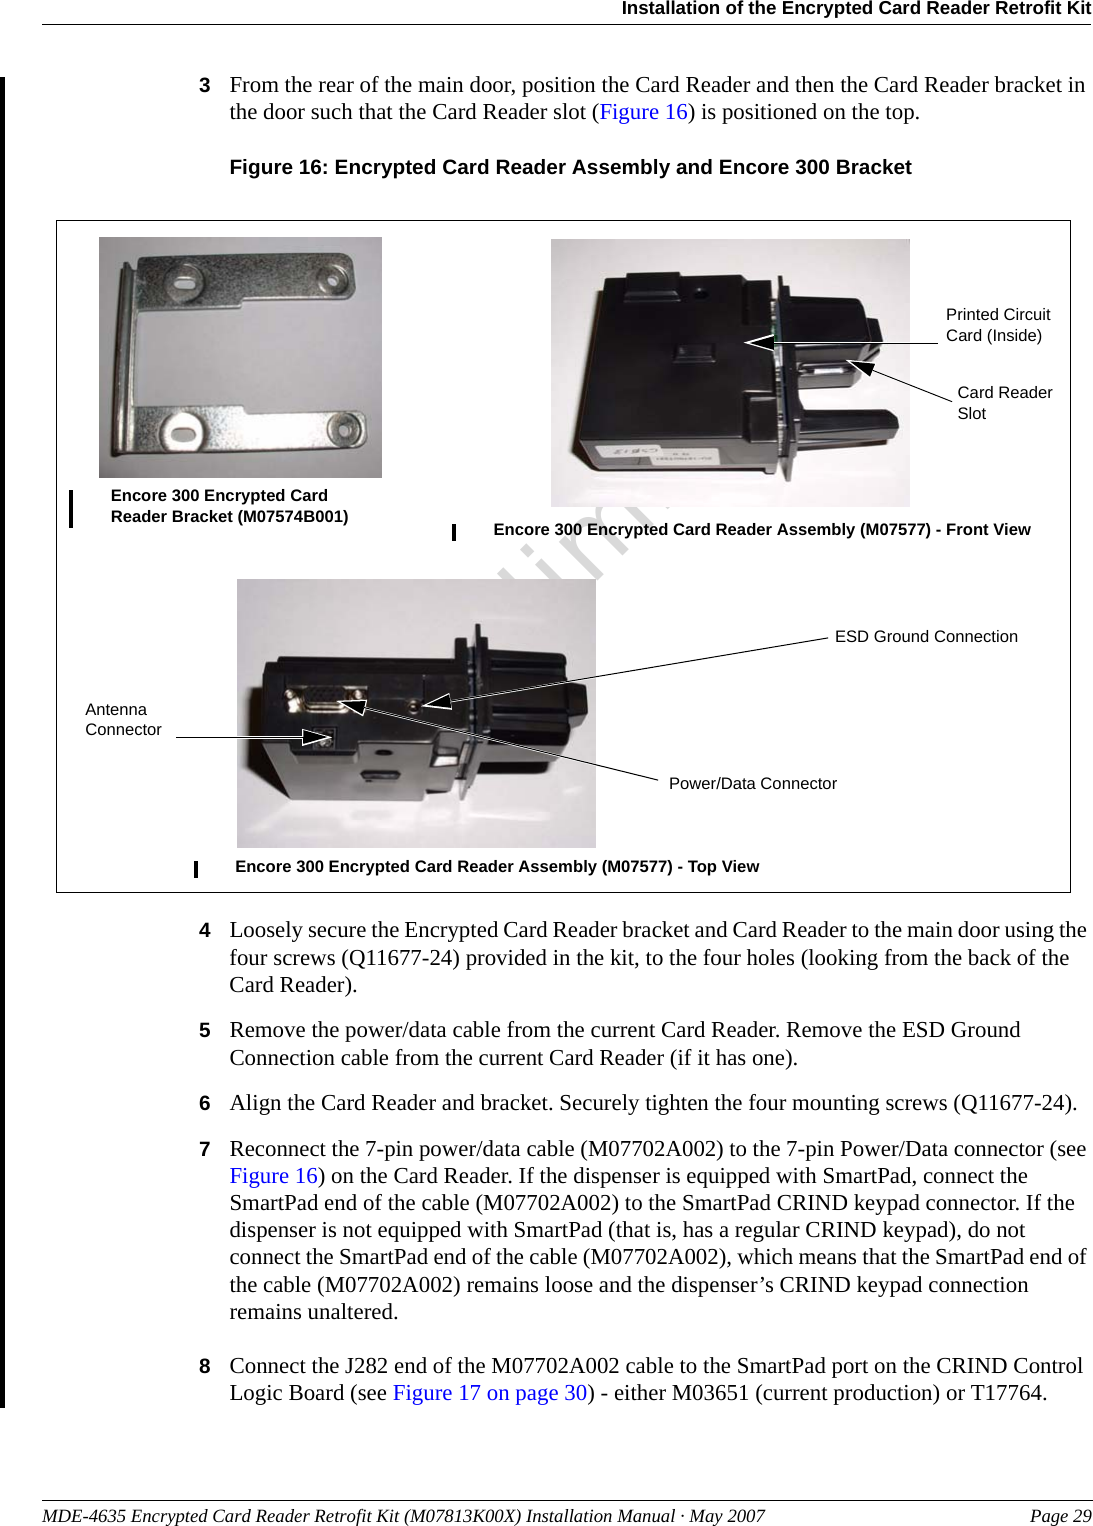 MDE-4635 Encrypted Card Reader Retrofit Kit (M07813K00X) Installation Manual · May 2007 Page 29Installation of the Encrypted Card Reader Retrofit KitPreliminary3From the rear of the main door, position the Card Reader and then the Card Reader bracket in the door such that the Card Reader slot (Figure 16) is positioned on the top.Figure 16: Encrypted Card Reader Assembly and Encore 300 BracketEncore 300 Encrypted Card Reader Bracket (M07574B001) Encore 300 Encrypted Card Reader Assembly (M07577) - Front ViewEncore 300 Encrypted Card Reader Assembly (M07577) - Top ViewPrinted Circuit Card (Inside)Power/Data ConnectorCard Reader SlotESD Ground ConnectionAntenna Connector4Loosely secure the Encrypted Card Reader bracket and Card Reader to the main door using the four screws (Q11677-24) provided in the kit, to the four holes (looking from the back of the Card Reader).5Remove the power/data cable from the current Card Reader. Remove the ESD Ground Connection cable from the current Card Reader (if it has one).6Align the Card Reader and bracket. Securely tighten the four mounting screws (Q11677-24).7Reconnect the 7-pin power/data cable (M07702A002) to the 7-pin Power/Data connector (see Figure 16) on the Card Reader. If the dispenser is equipped with SmartPad, connect the SmartPad end of the cable (M07702A002) to the SmartPad CRIND keypad connector. If the dispenser is not equipped with SmartPad (that is, has a regular CRIND keypad), do not connect the SmartPad end of the cable (M07702A002), which means that the SmartPad end of the cable (M07702A002) remains loose and the dispenser’s CRIND keypad connection remains unaltered.8Connect the J282 end of the M07702A002 cable to the SmartPad port on the CRIND Control Logic Board (see Figure 17 on page 30) - either M03651 (current production) or T17764.